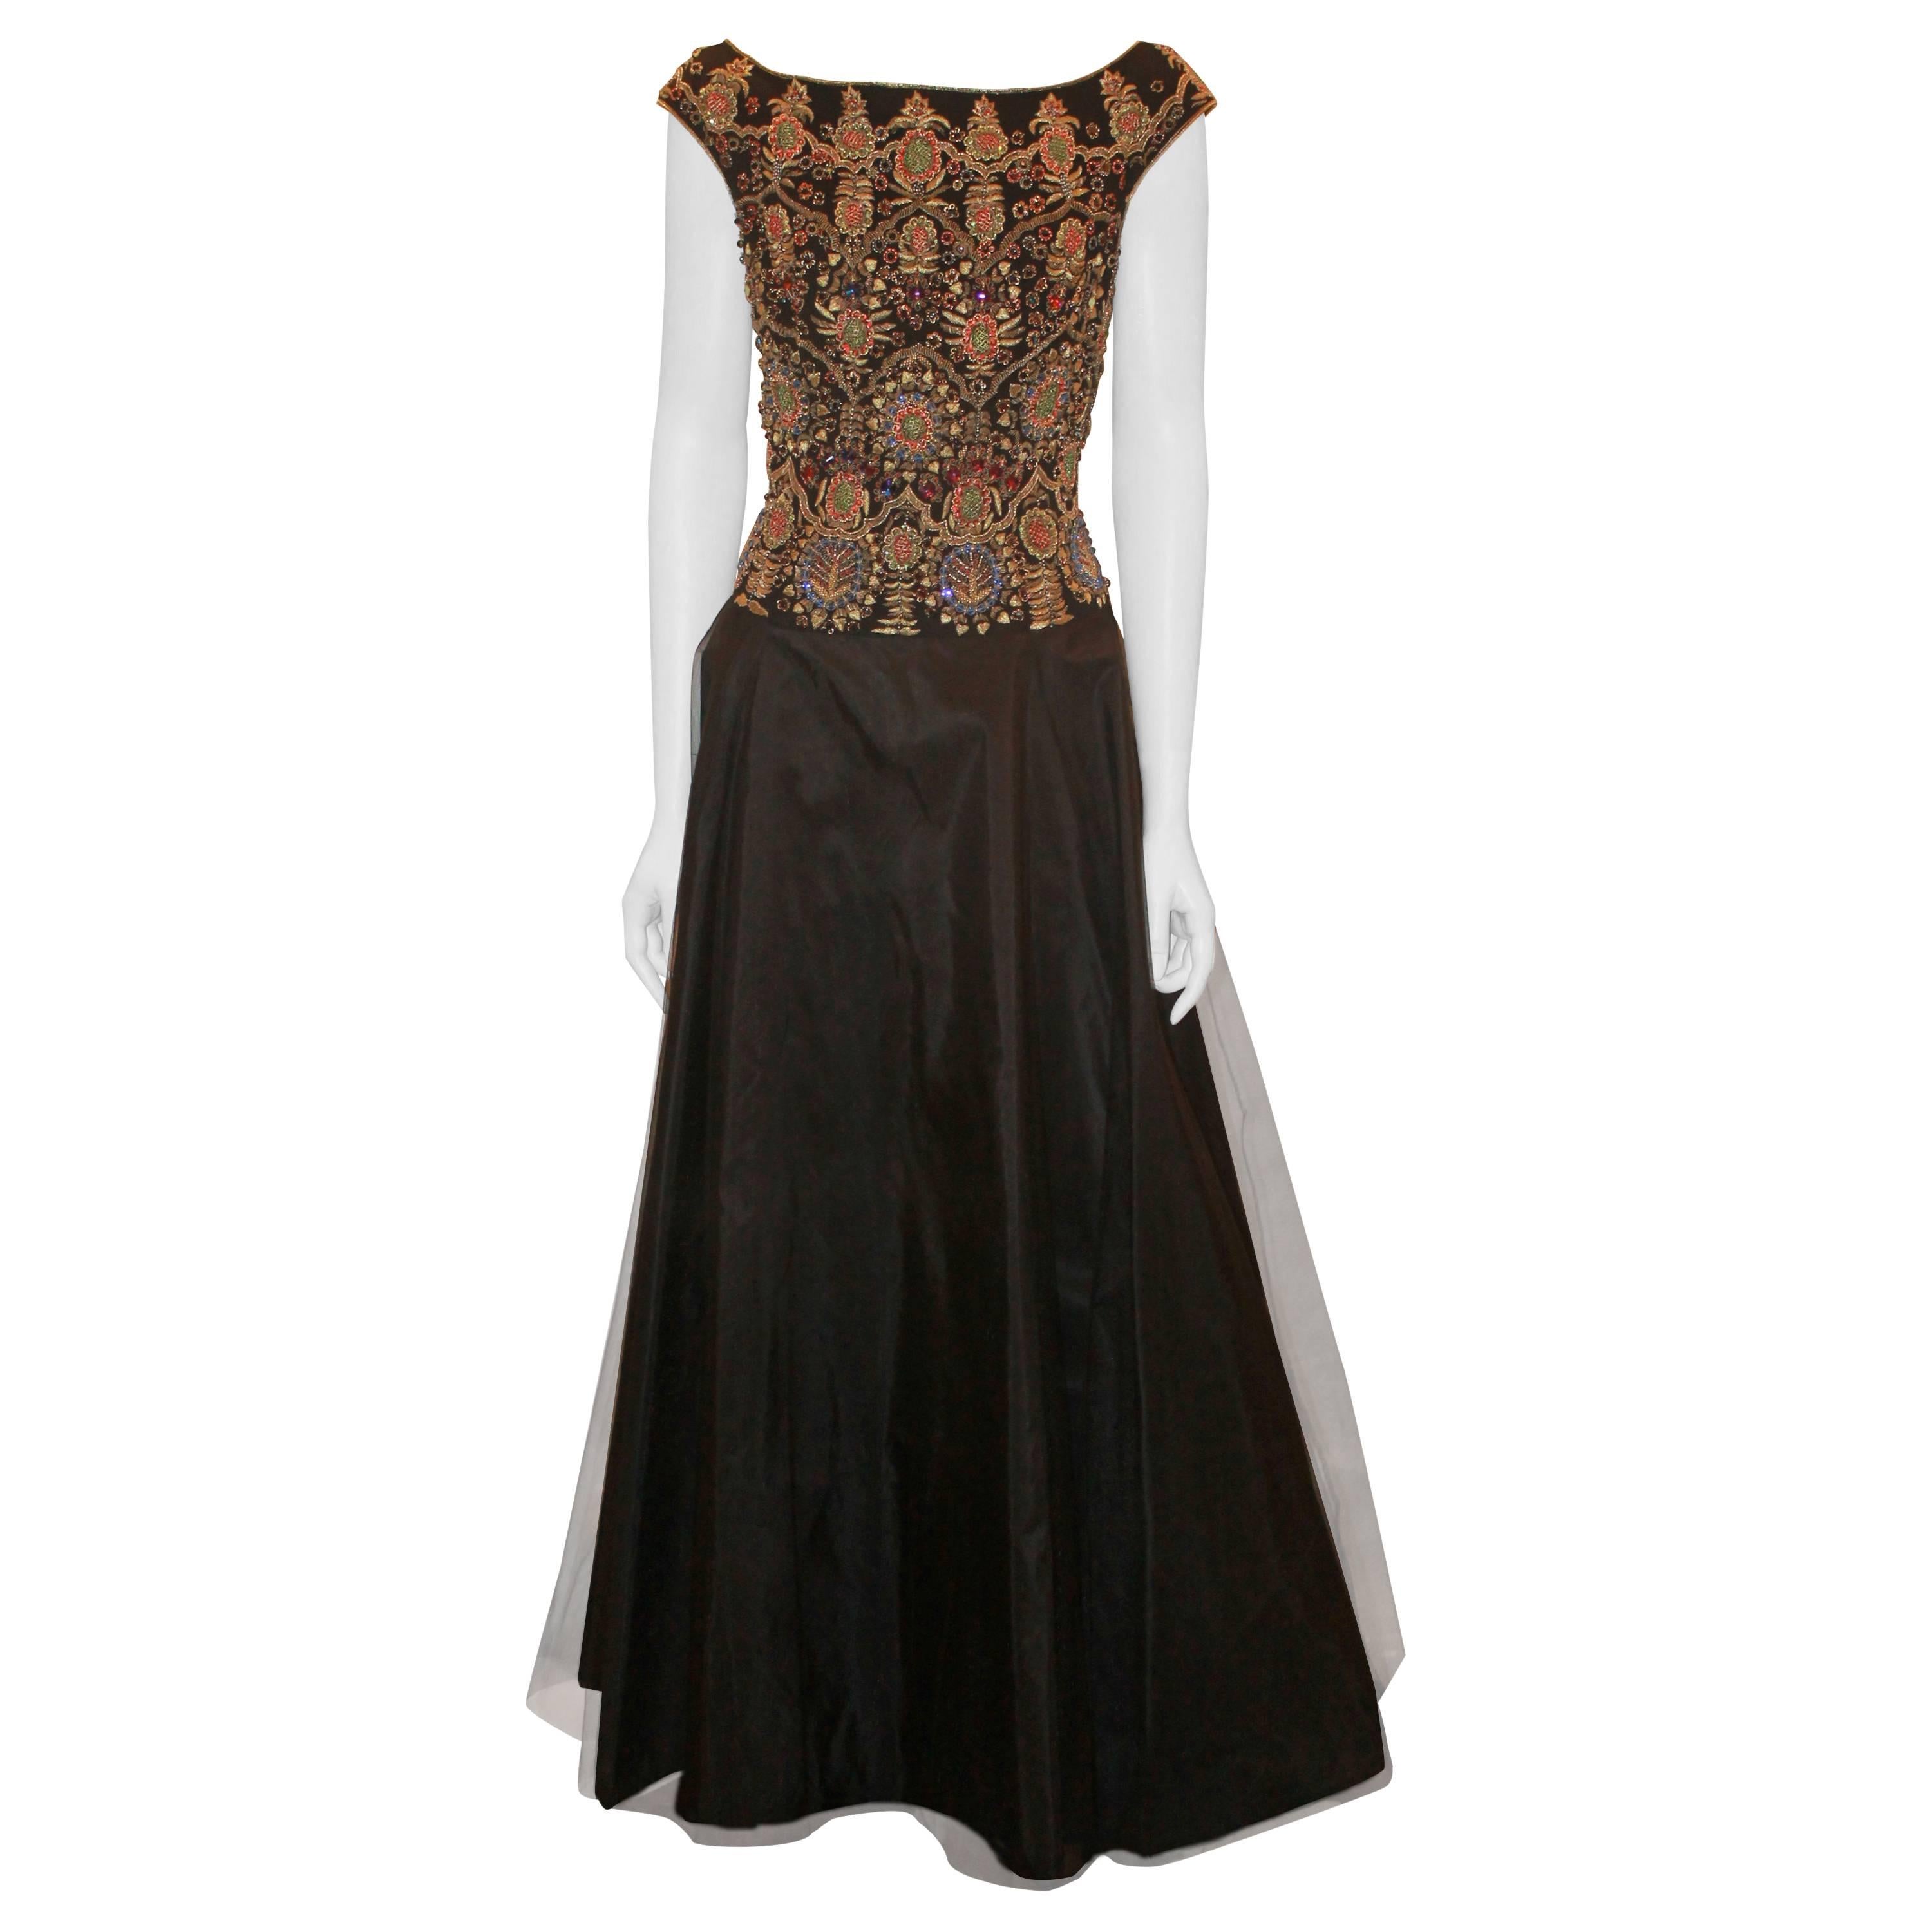 Escada 1990’s Black Silk and Tulle Gown w/ Heavily Beaded Bodice - Size 38 For Sale